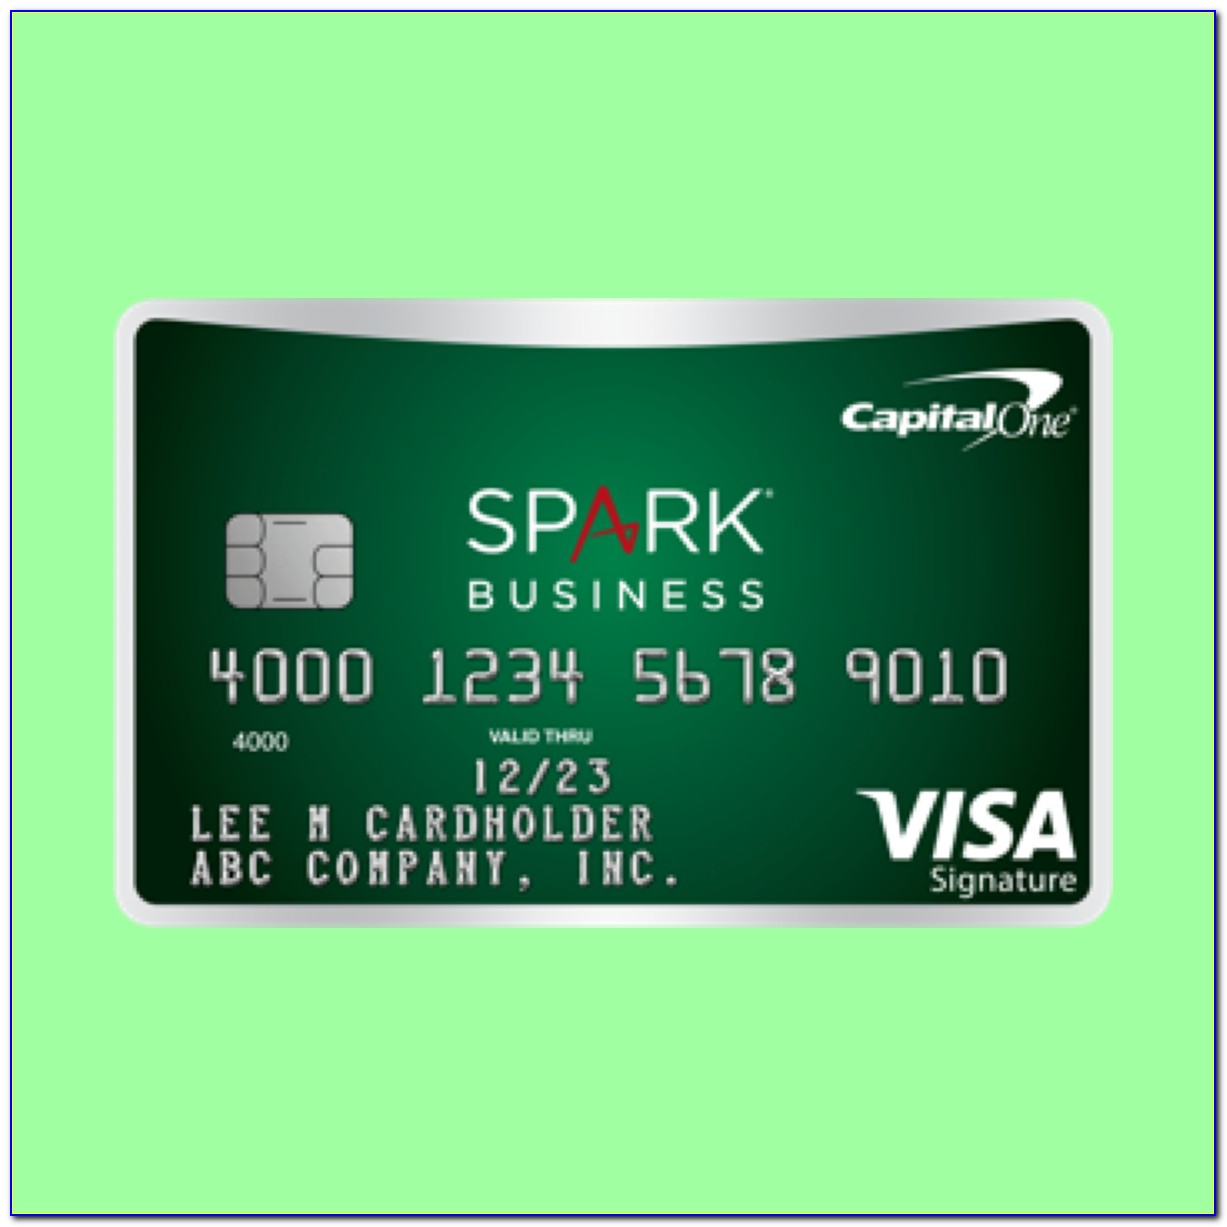 Capital One Spark Business Credit Card Benefits